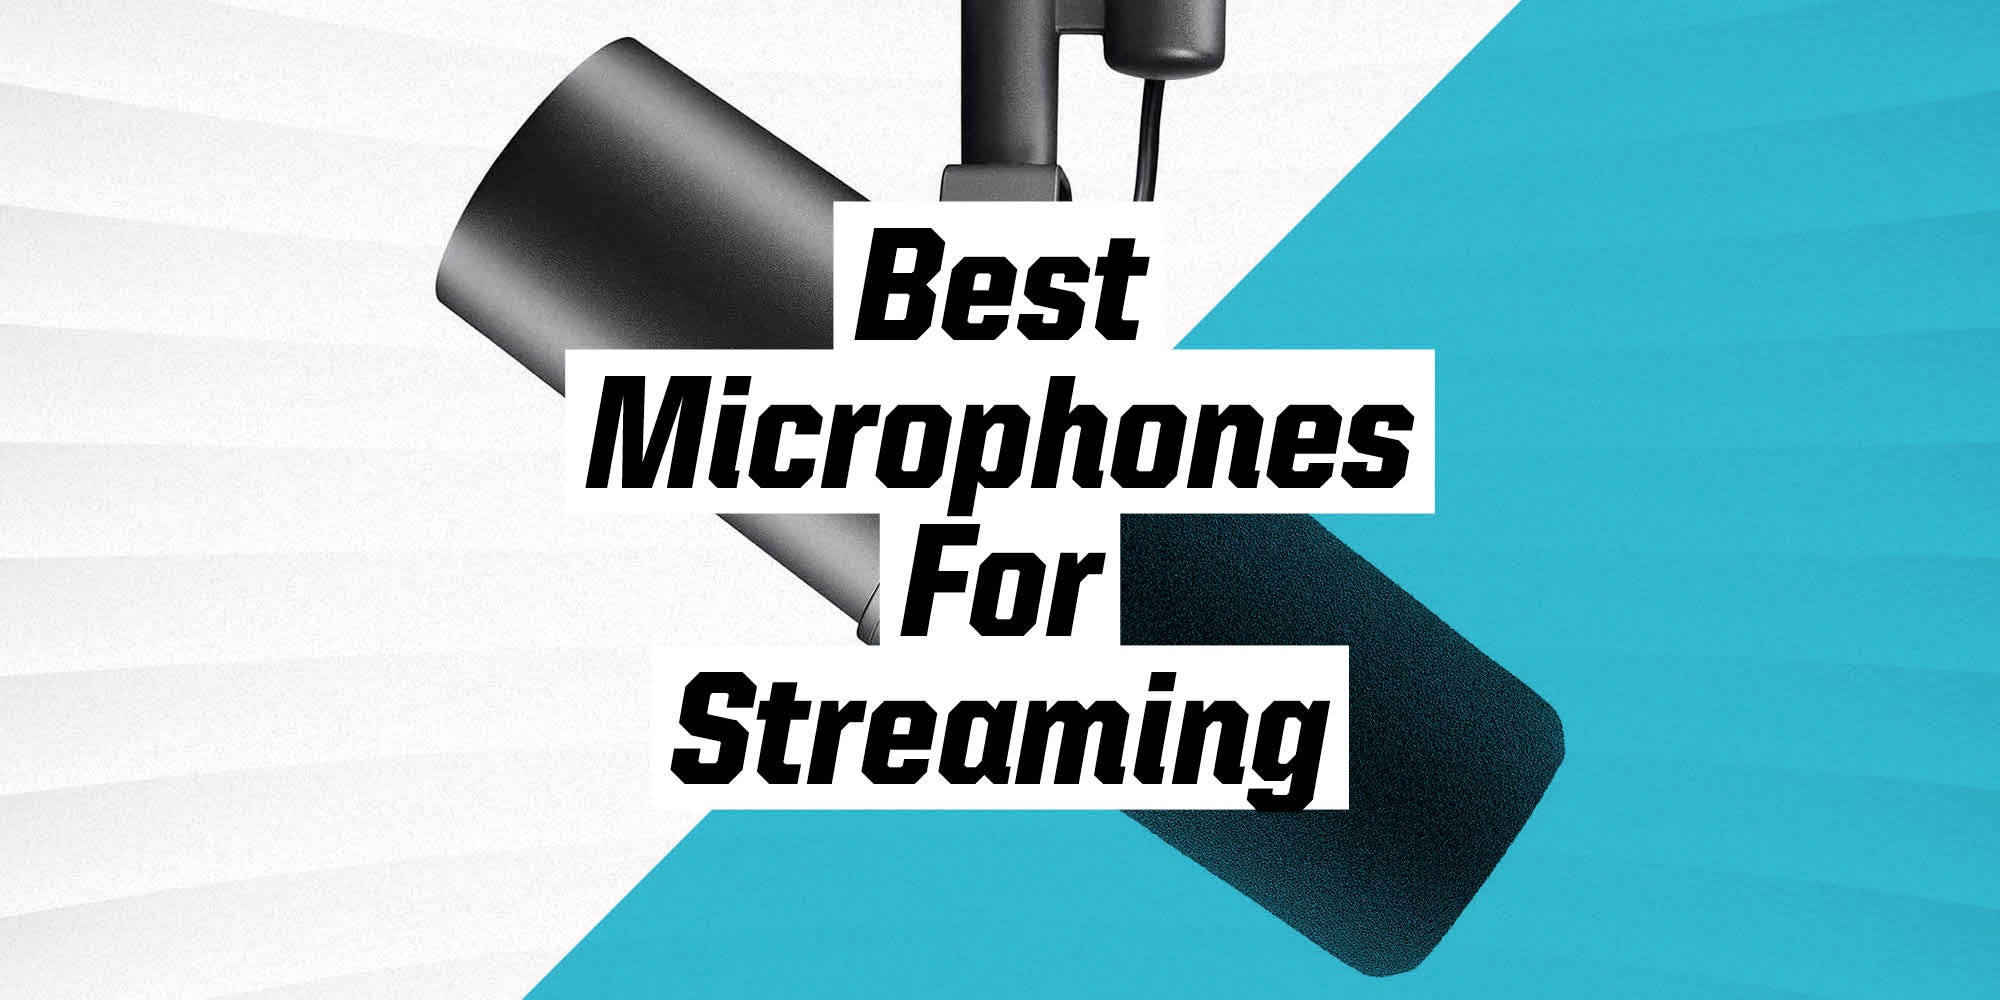 The 6 Best Microphones for Streaming